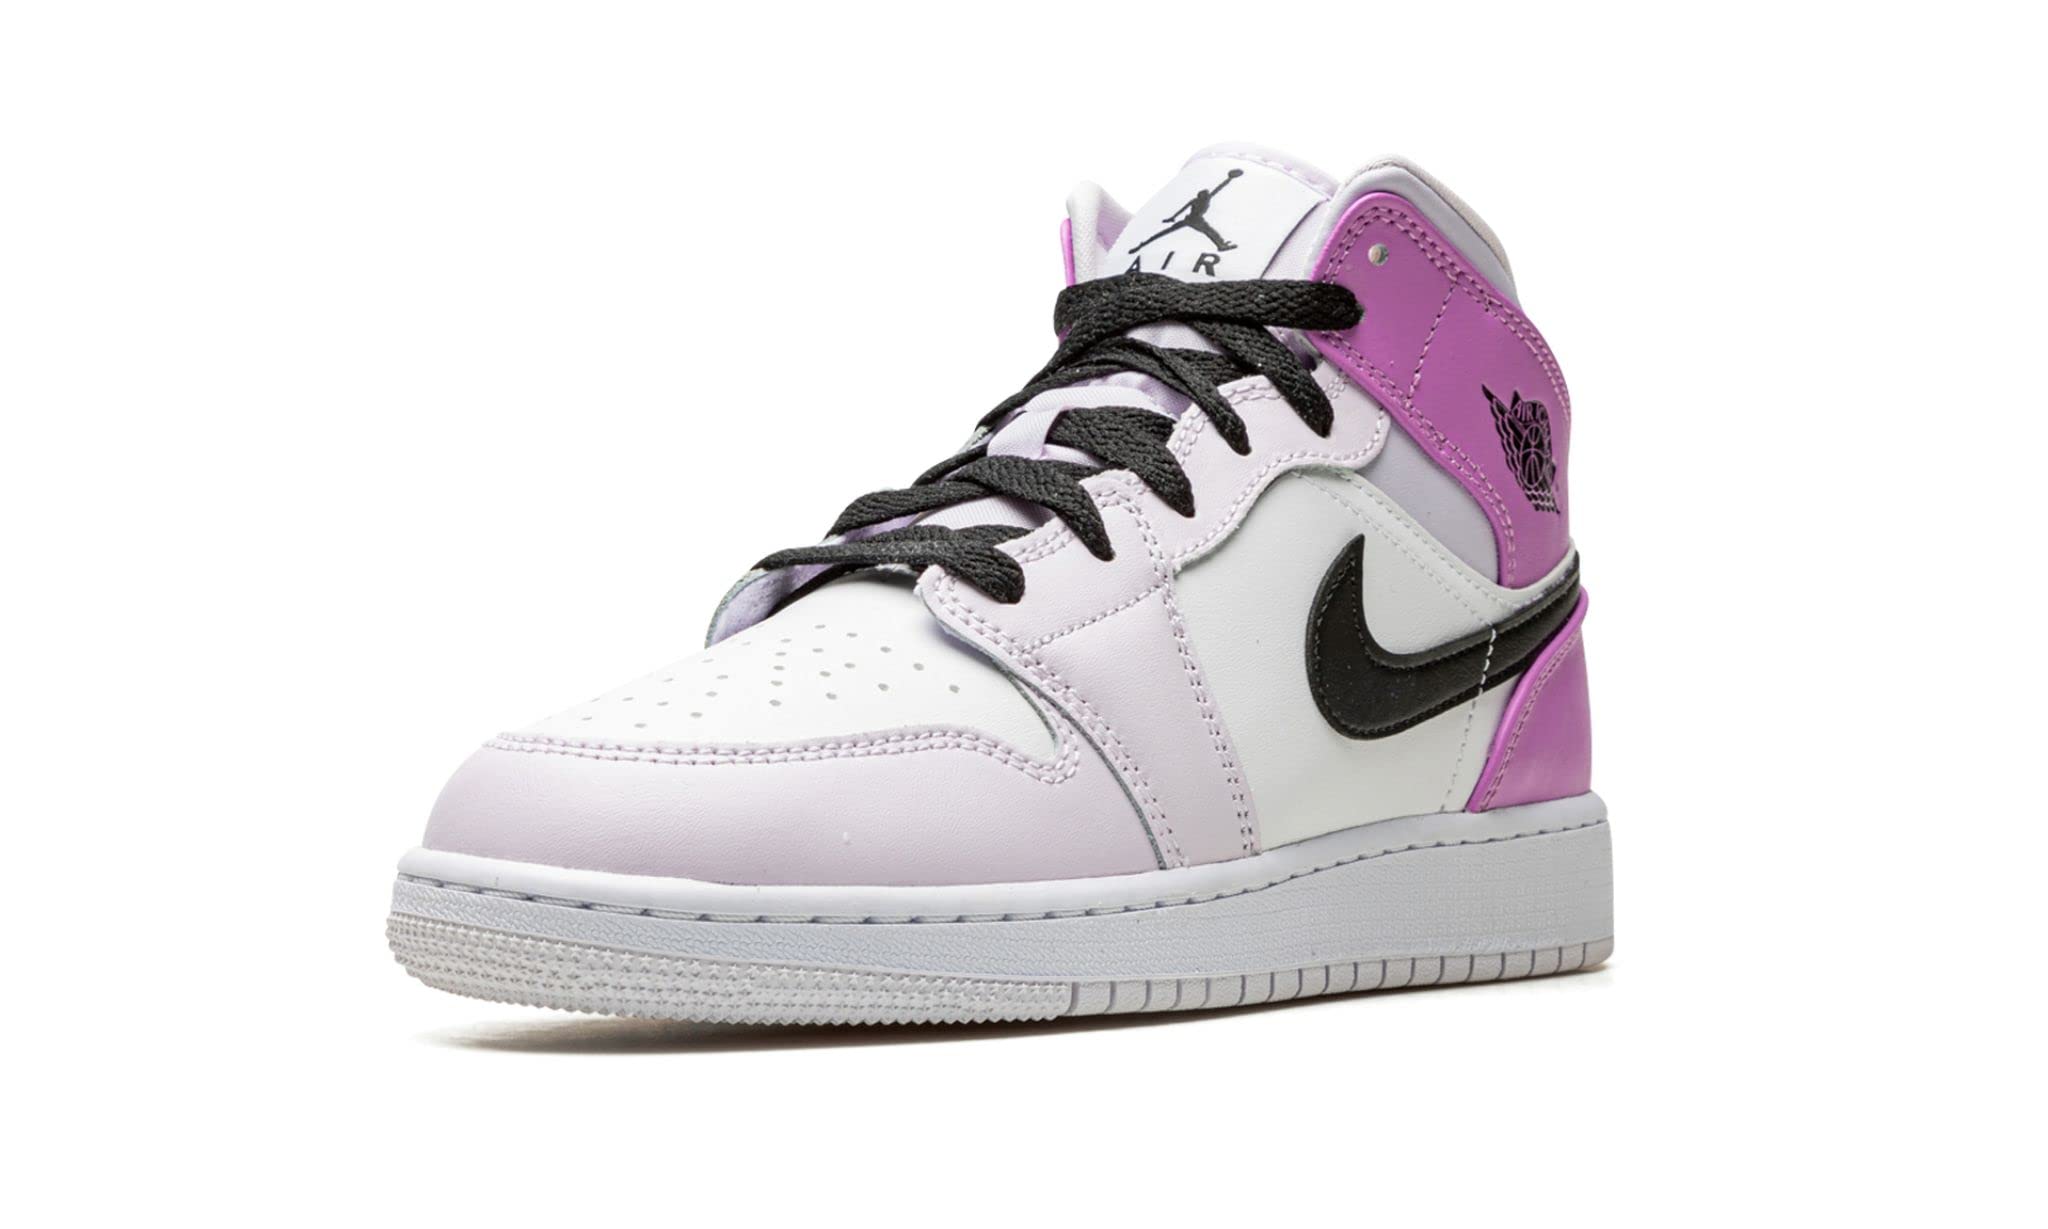 Jordan Youth Air 1 Mid GS DQ8423 501 Barely Grape - Size 6.5Y